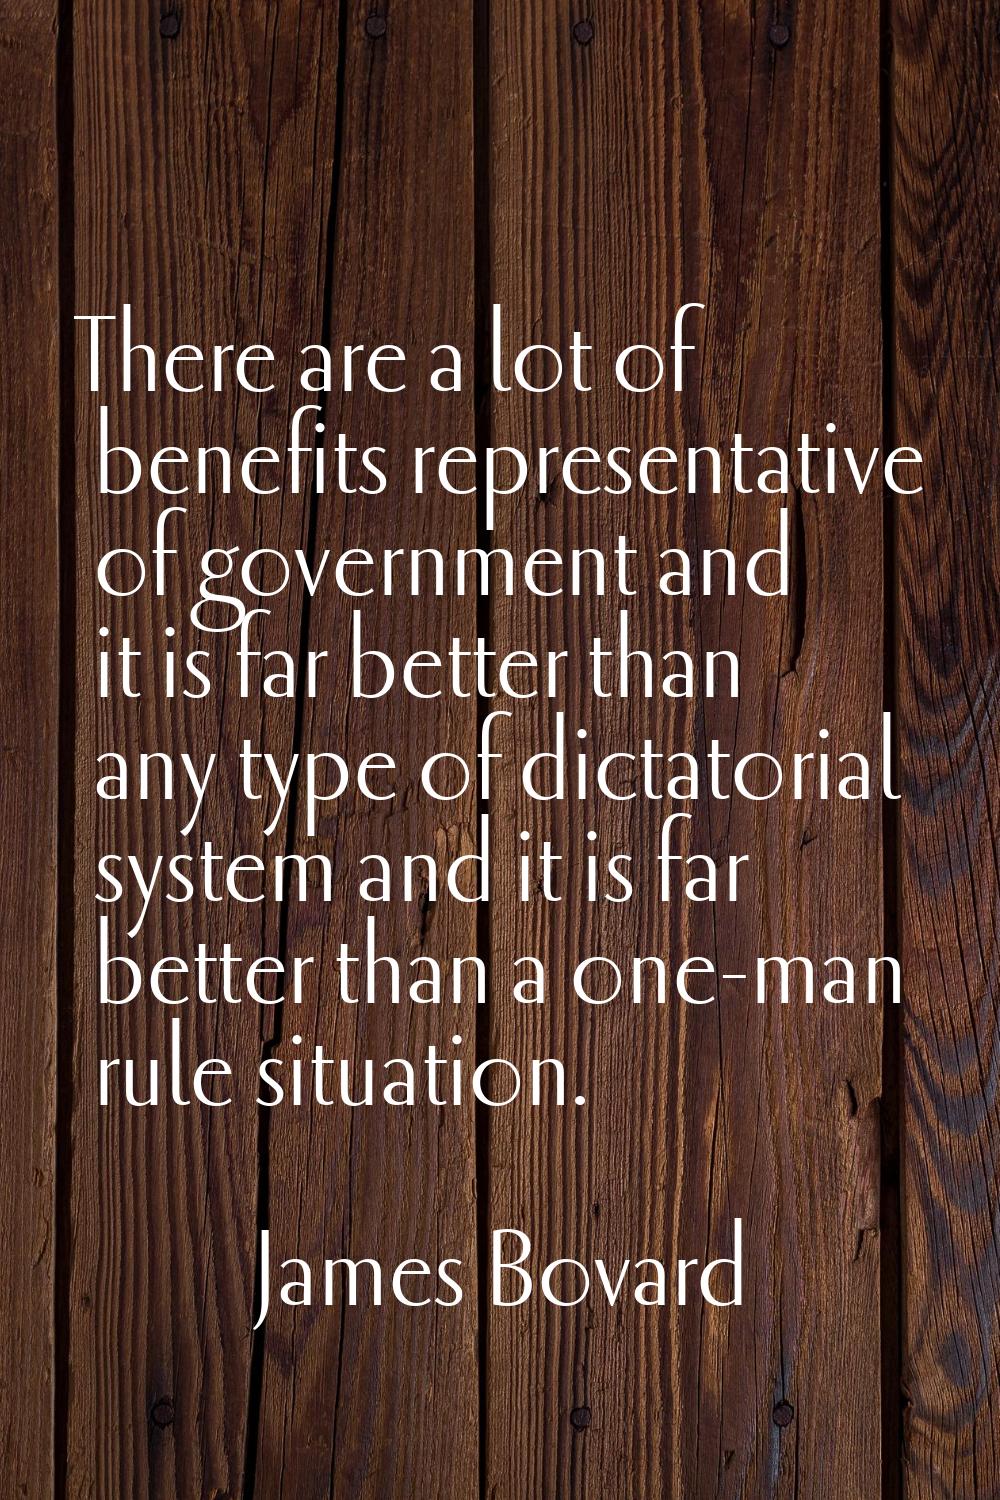 There are a lot of benefits representative of government and it is far better than any type of dict